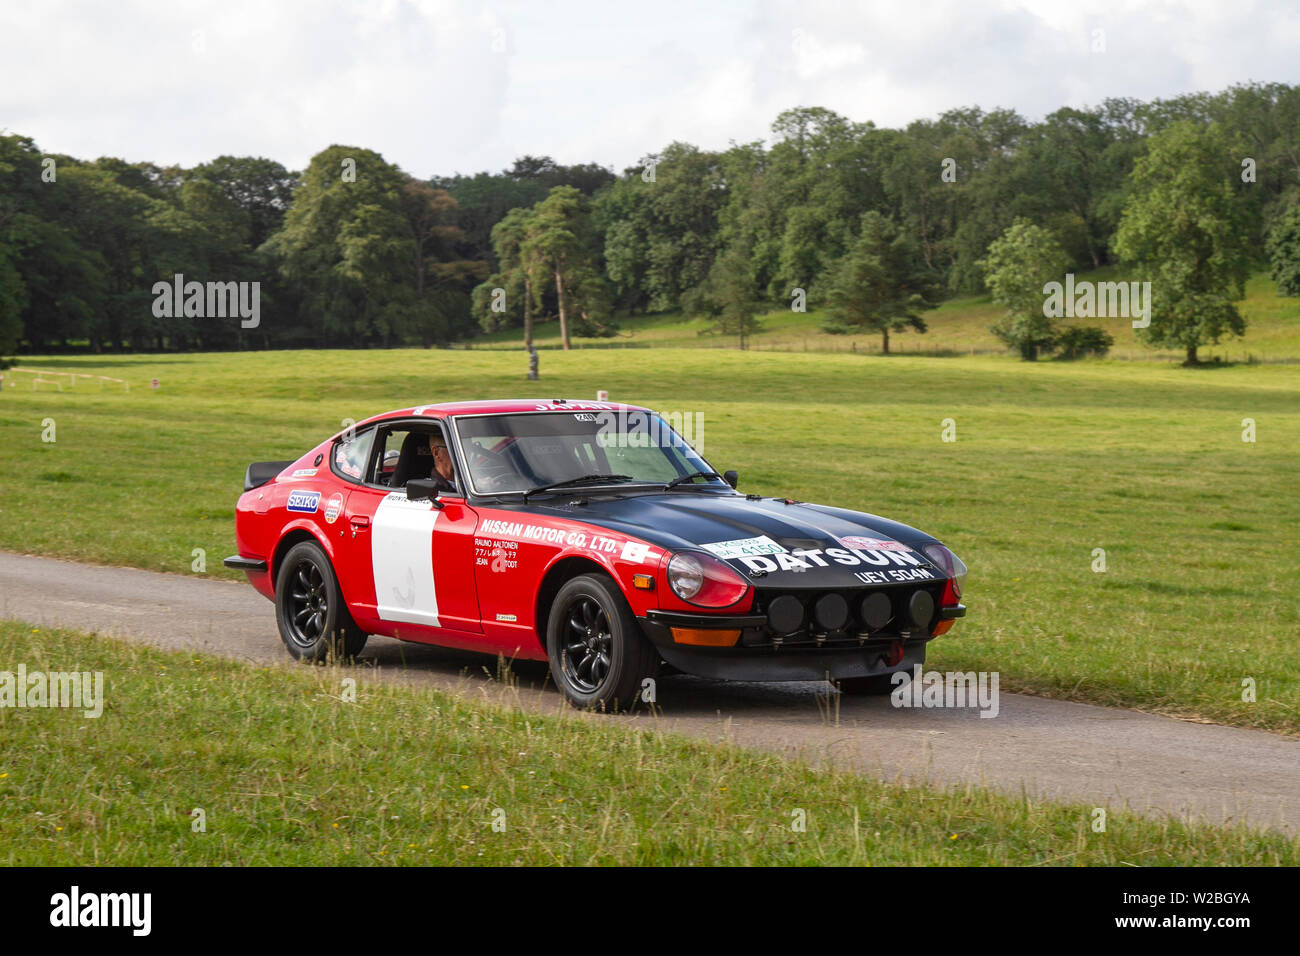 1972 70s seventies Nissan Datsun 240Z supercar at Classic Car Rally July 2019. Mark Woodward’s midsummer classic car show traveled to scenic Carnforth to showcase more classics, historics, vintage motors and collectables at this year’s Leighton Hall transport show, an opportunity to see over 500 classic vehicles of yesteryear at one of the most comprehensive and diverse shows in the summer classic car event. Stock Photo